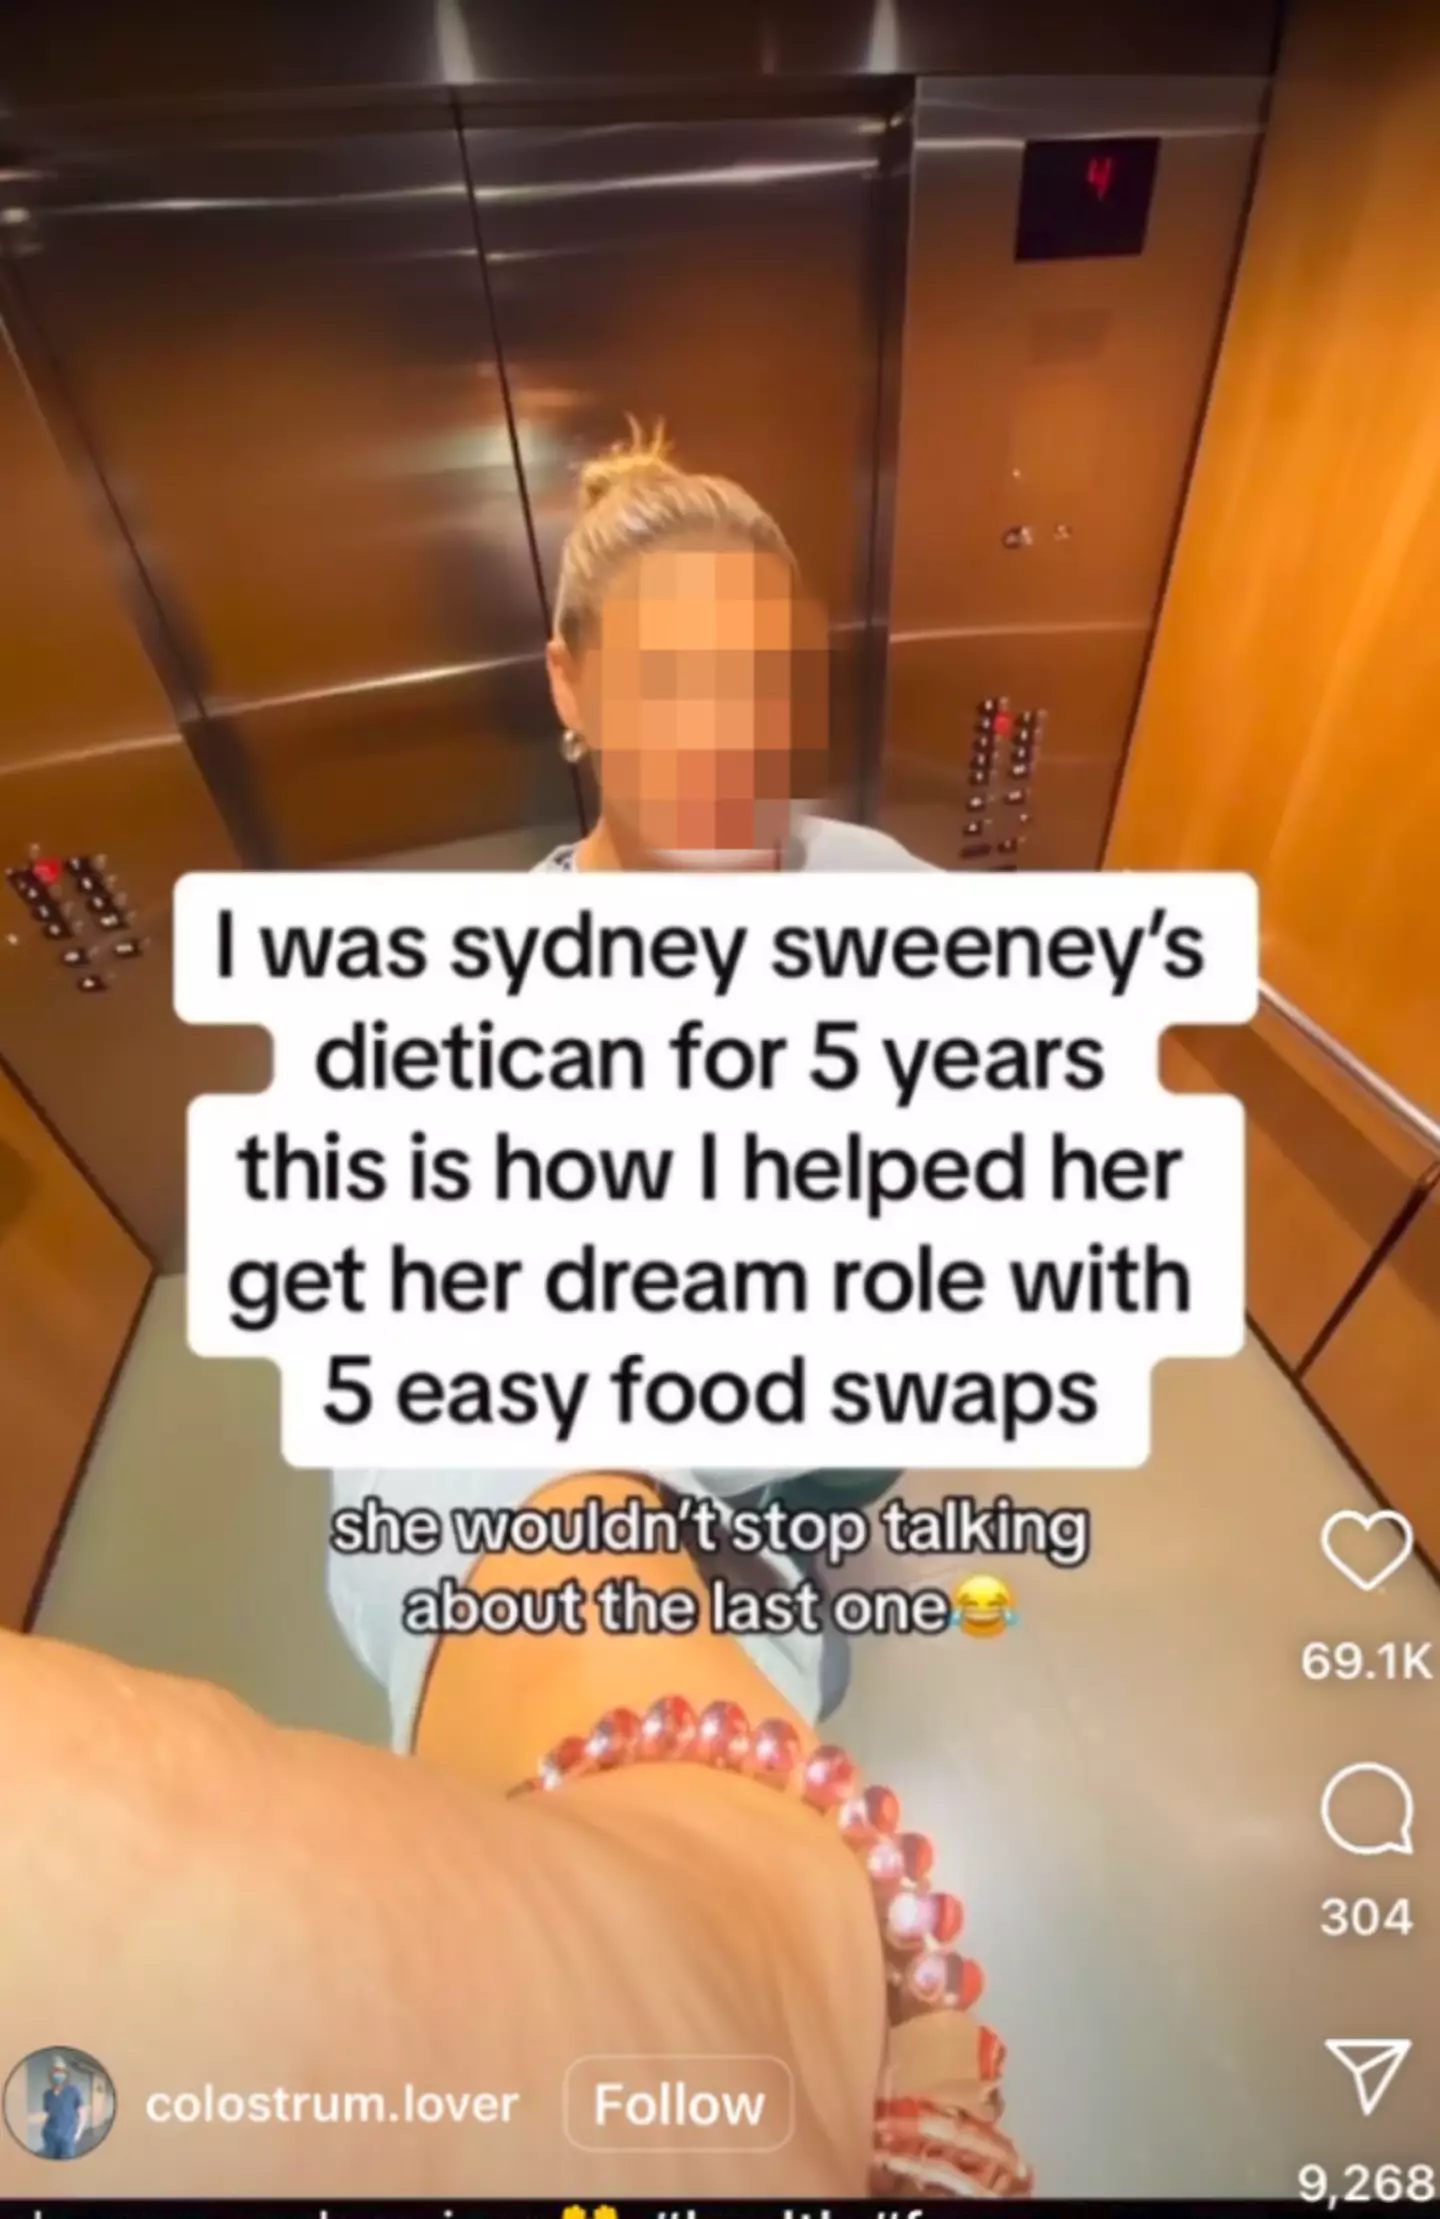 The image 'stole' a picture of a woman online and made a false claim to be Sydney Sweeney's dietician.